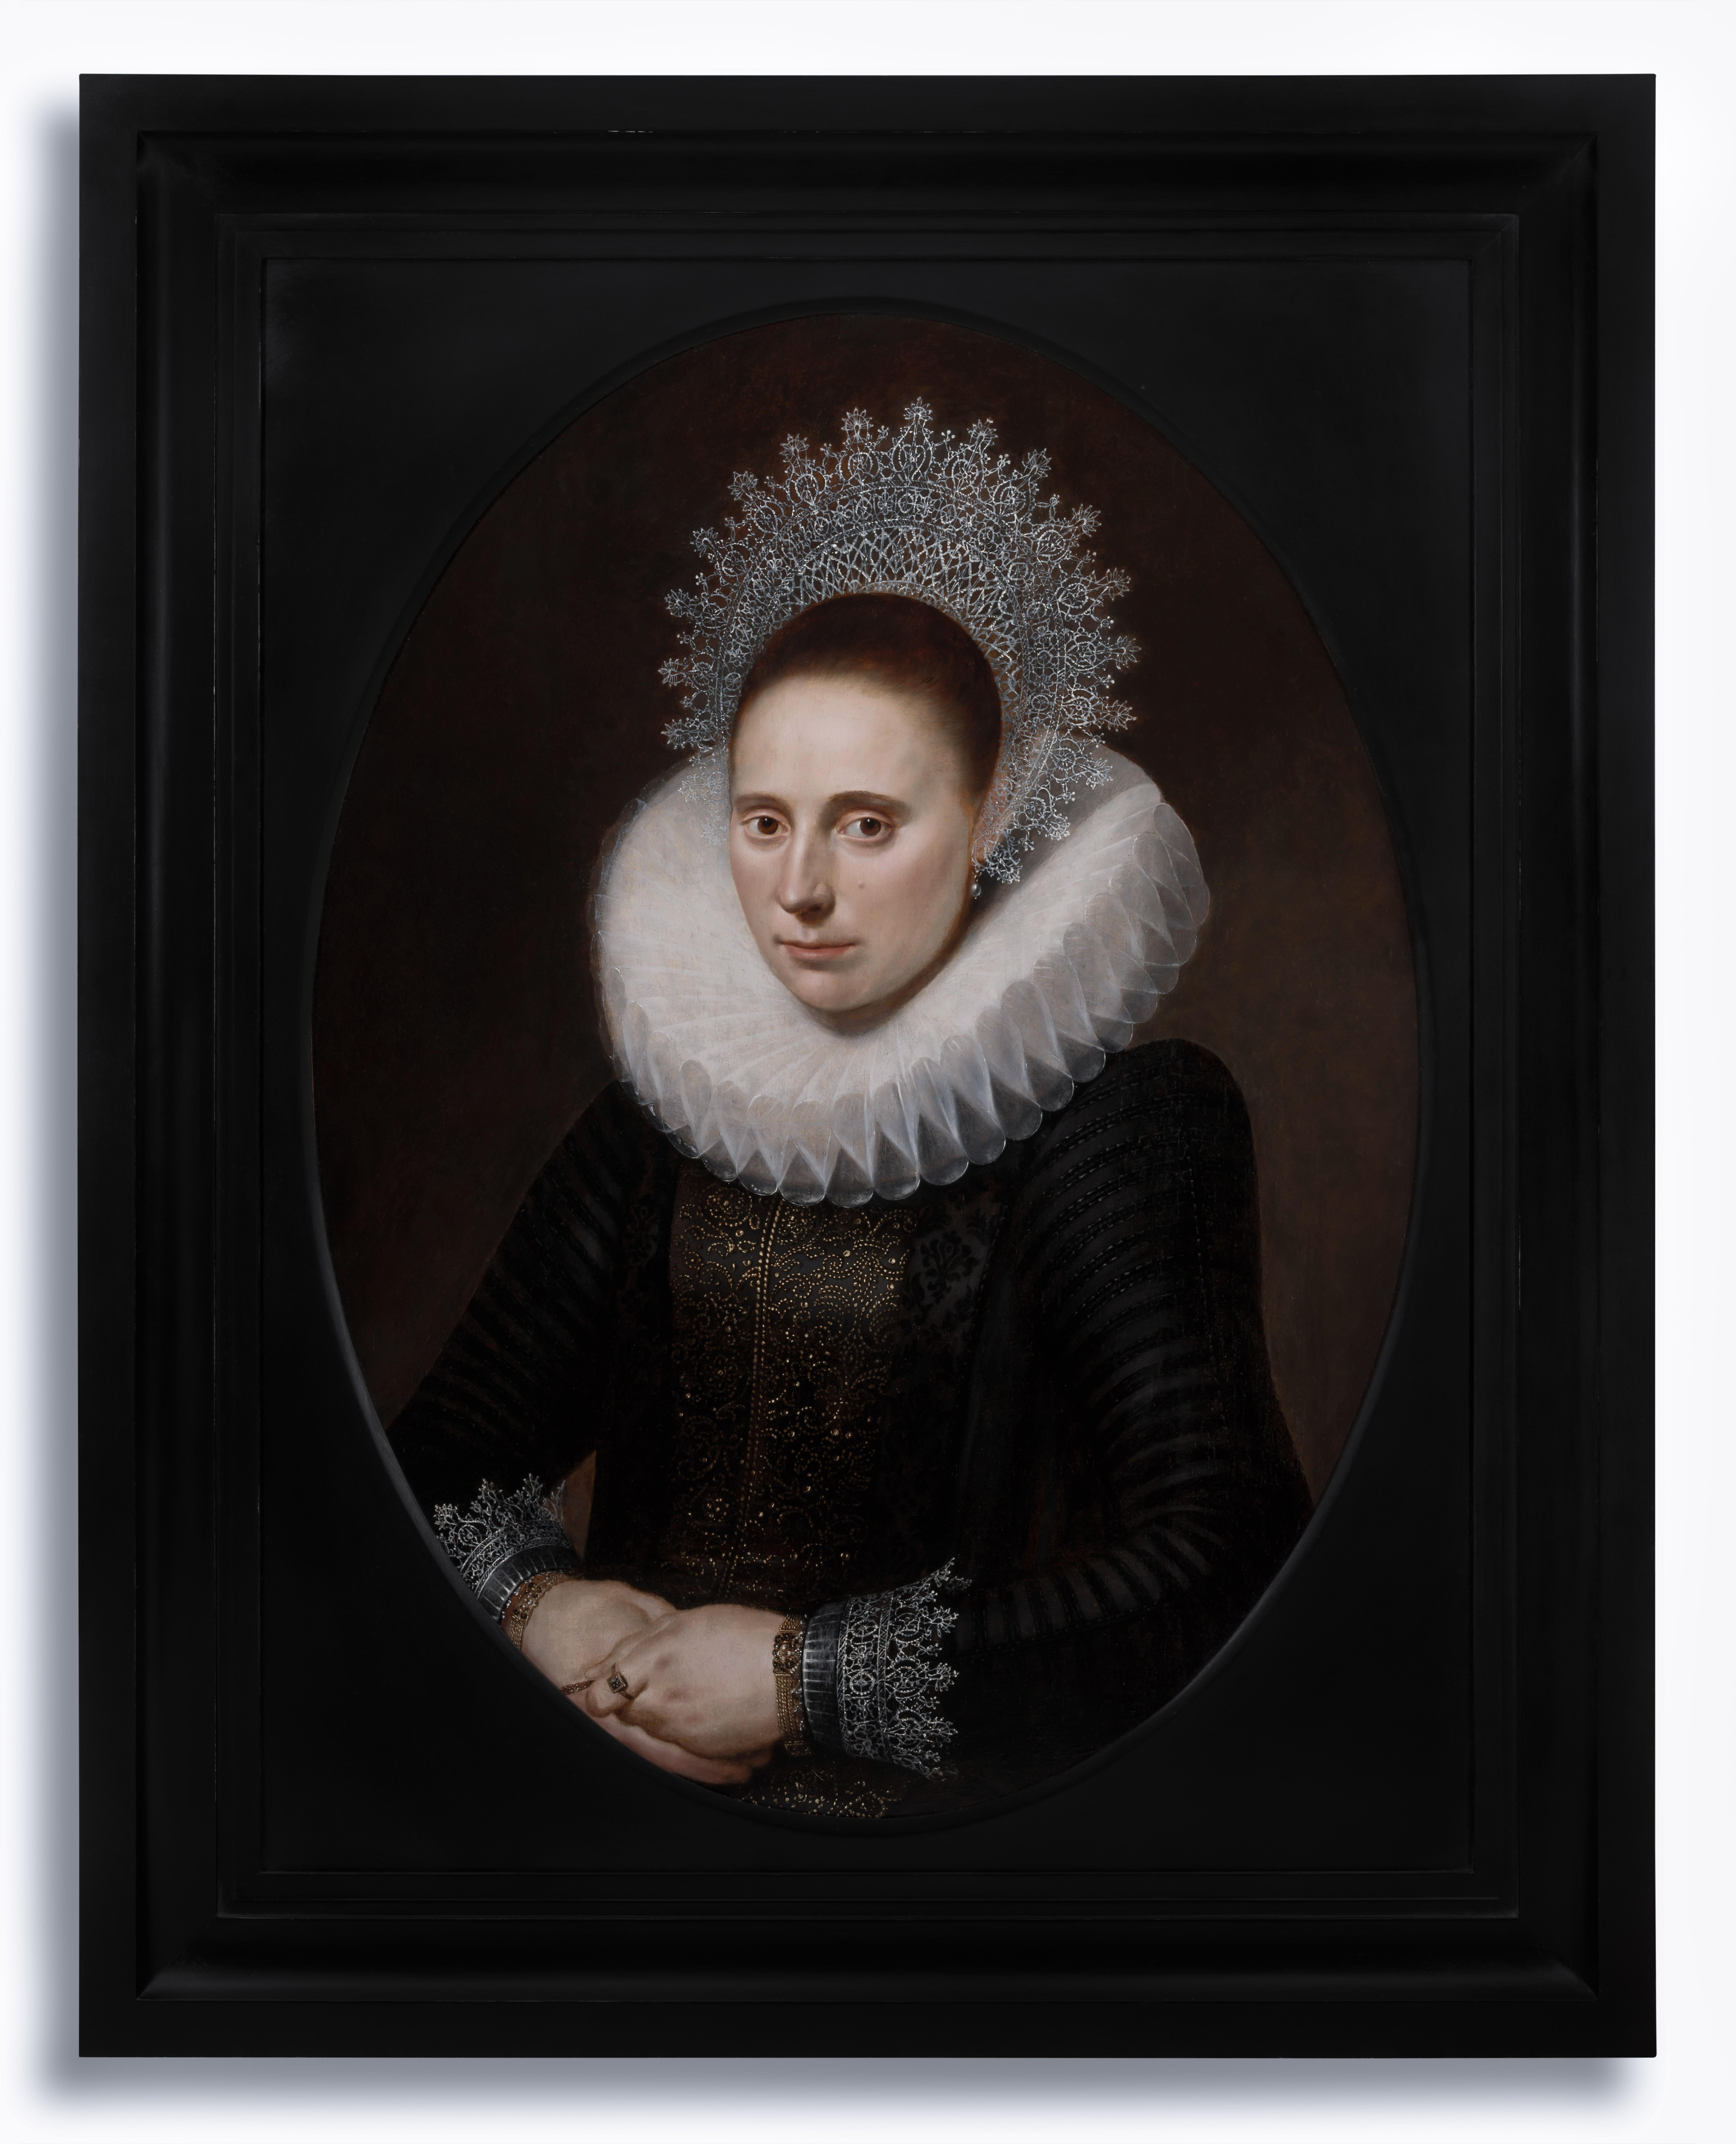 Portrait of a Lady in an Elaborate Ruff & Lace Coif c.1610-20, Dutch Old Master